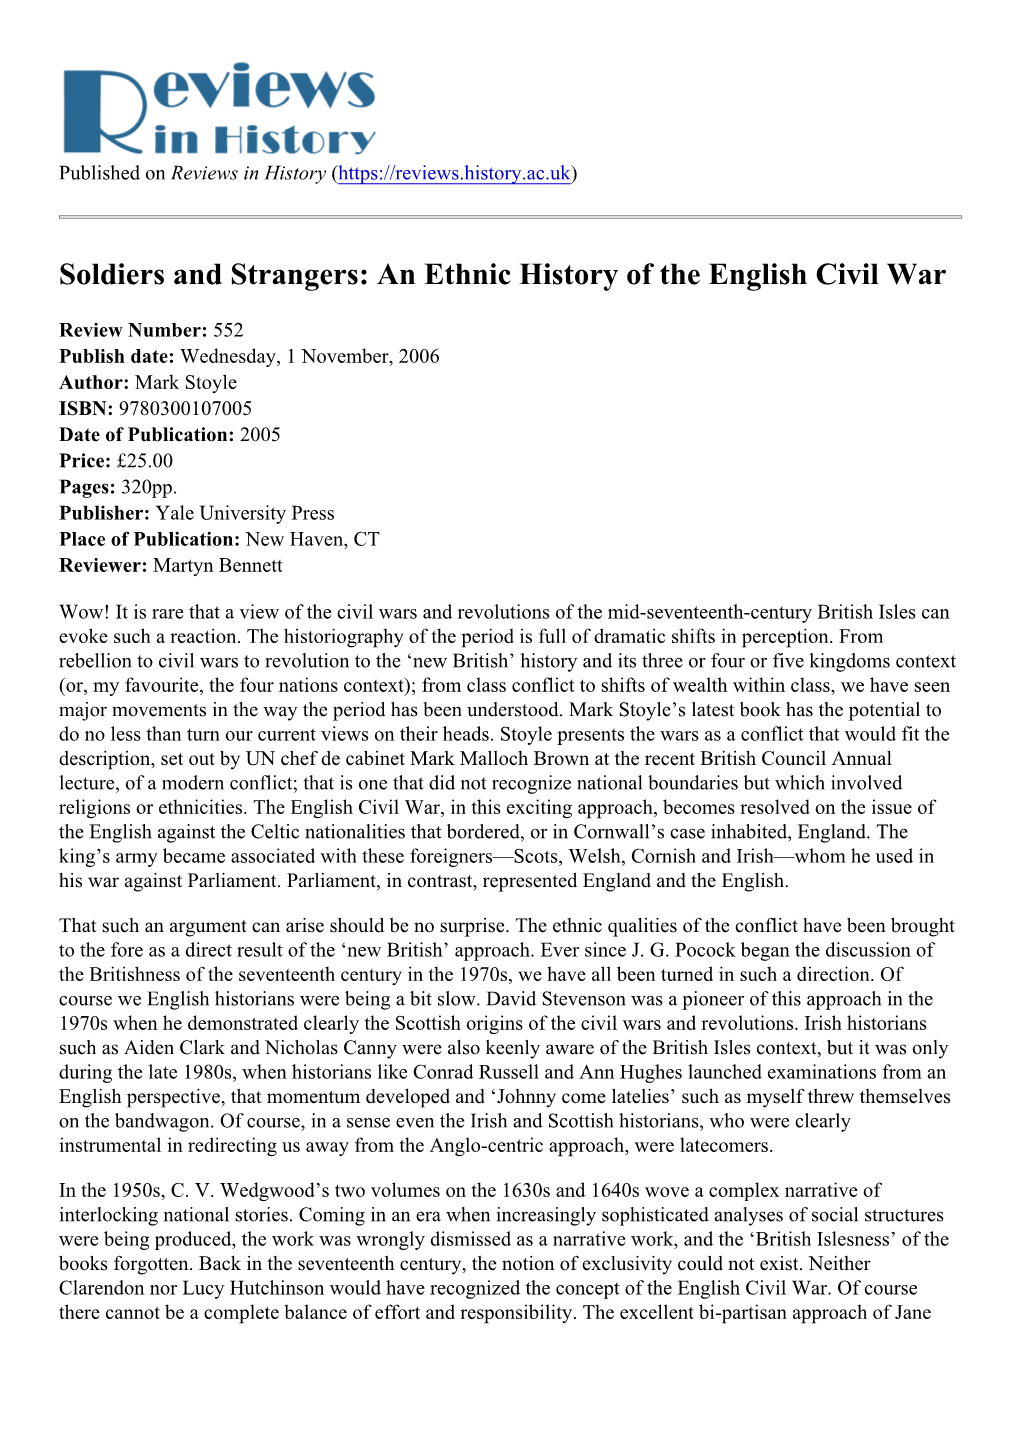 Soldiers and Strangers: an Ethnic History of the English Civil War